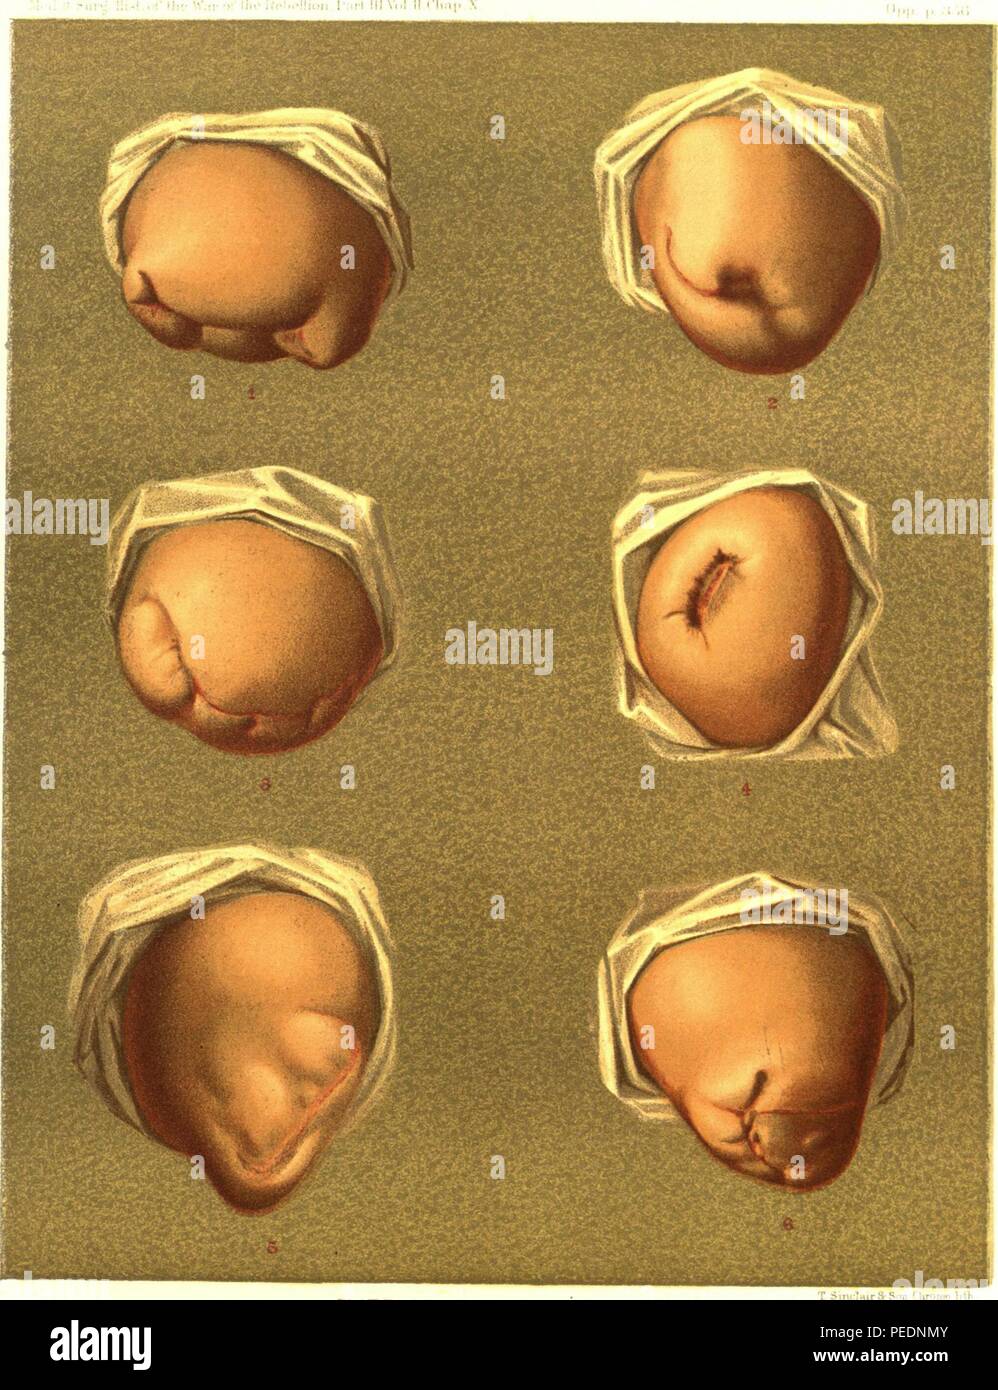 Color print depicting six images of the stumps remaining after human thighs were amputated, numbered 1-6 to indicate the amputation style, by anterior flap, posterior flap, anterior-posterior flaps, circular flaps, lateral flaps, and by flap of skin and circular muscles respectively, published in 'The Medical and Surgical History of the War of the Rebellion Part III, Volume II (3rd Surgical volume)', 1883. Courtesy Internet Archive. () Stock Photo